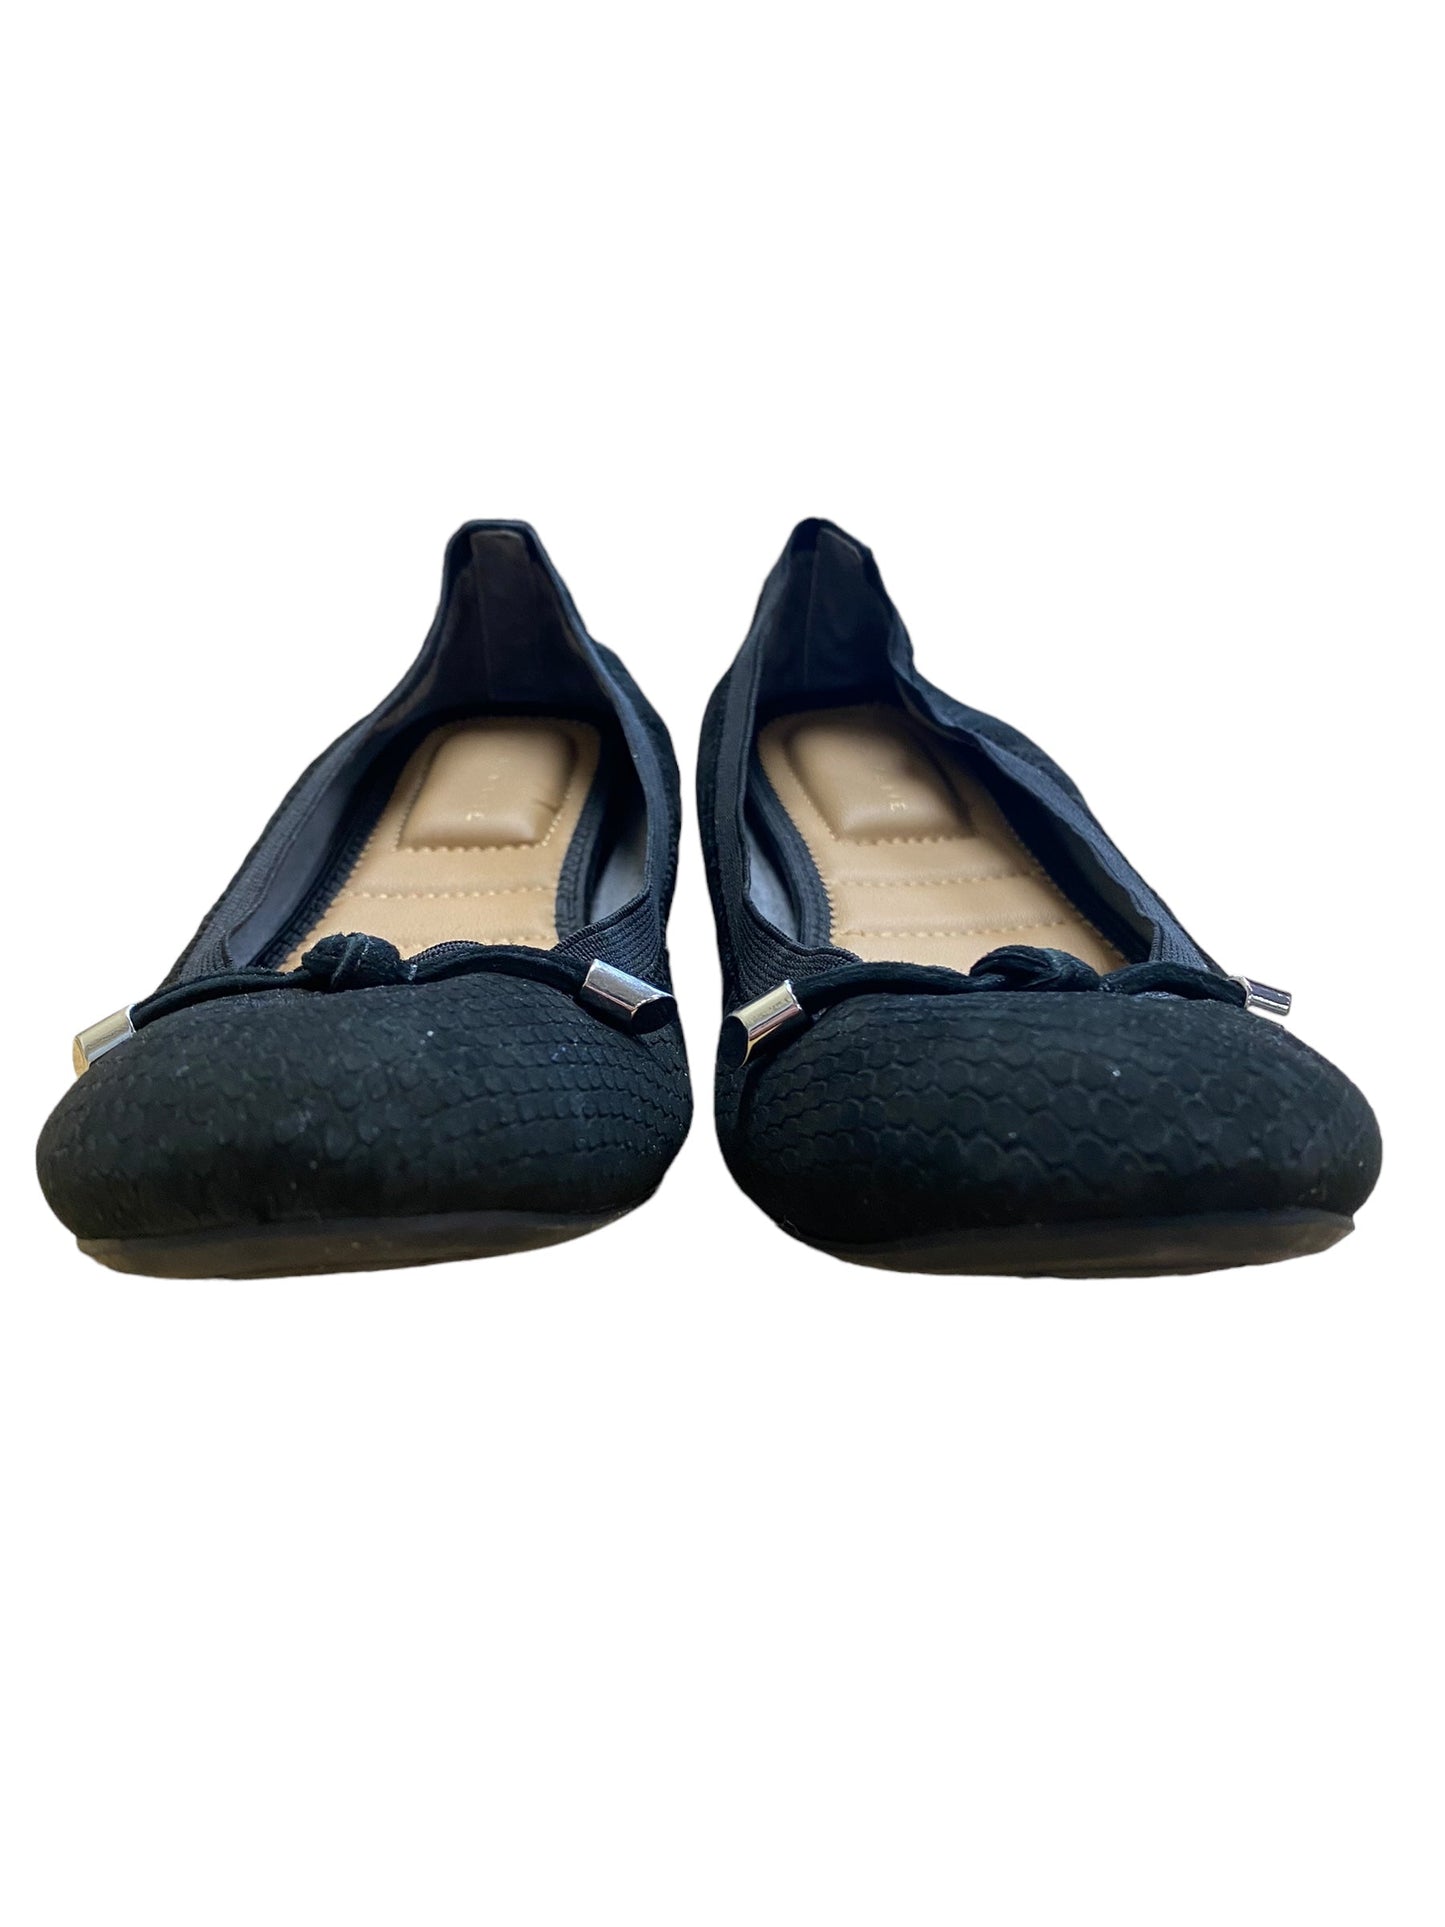 Black Shoes Flats Kelly And Katie, Size 8.5